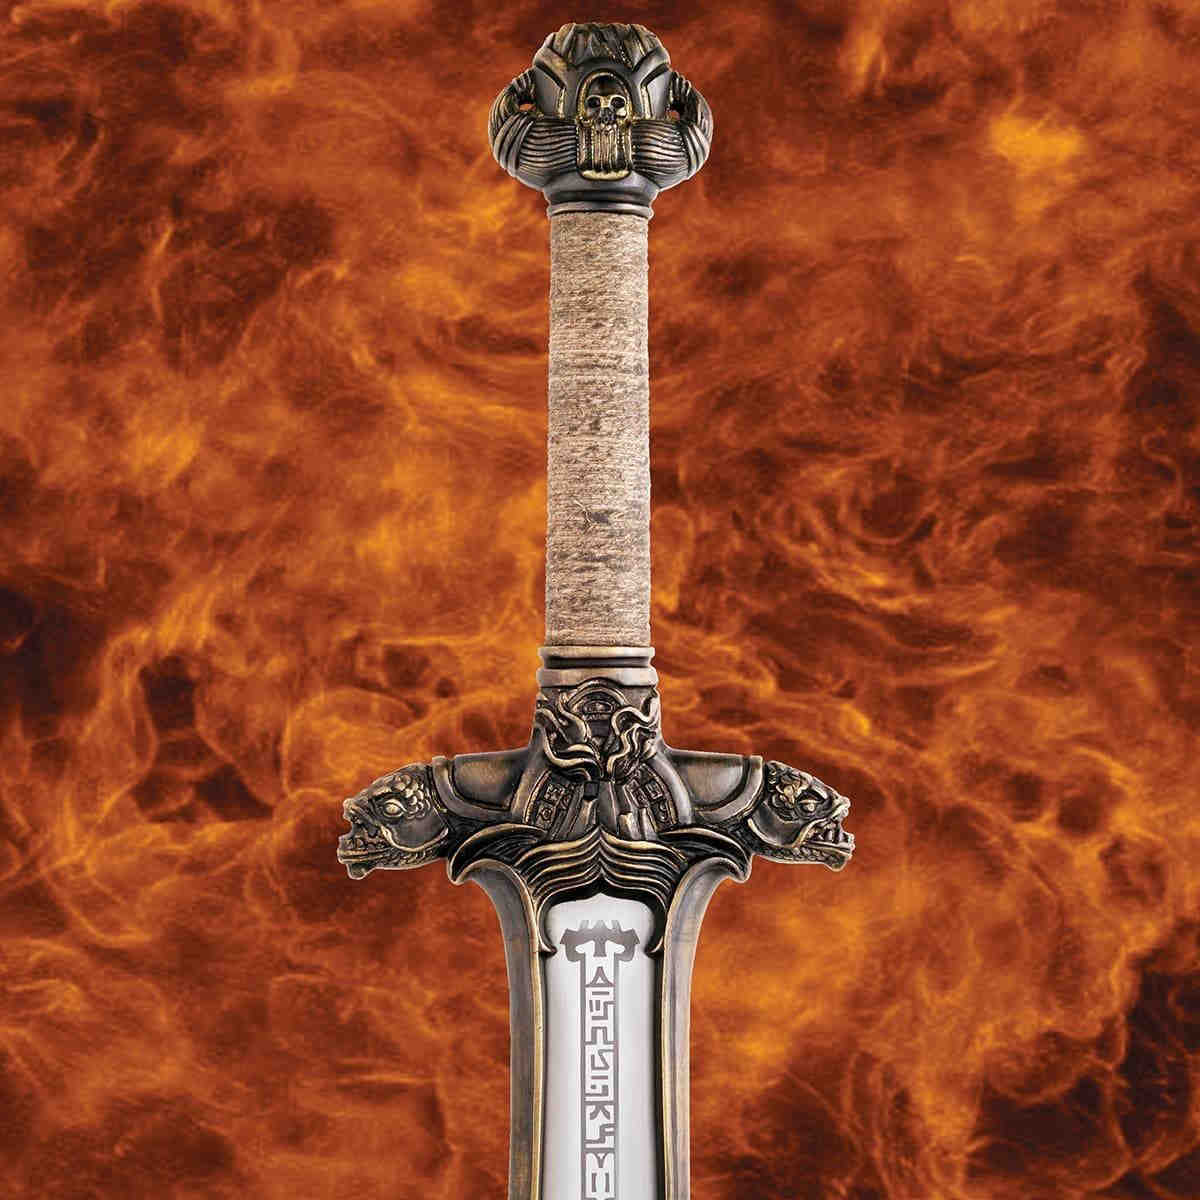 How much did the sword in Conan weigh?